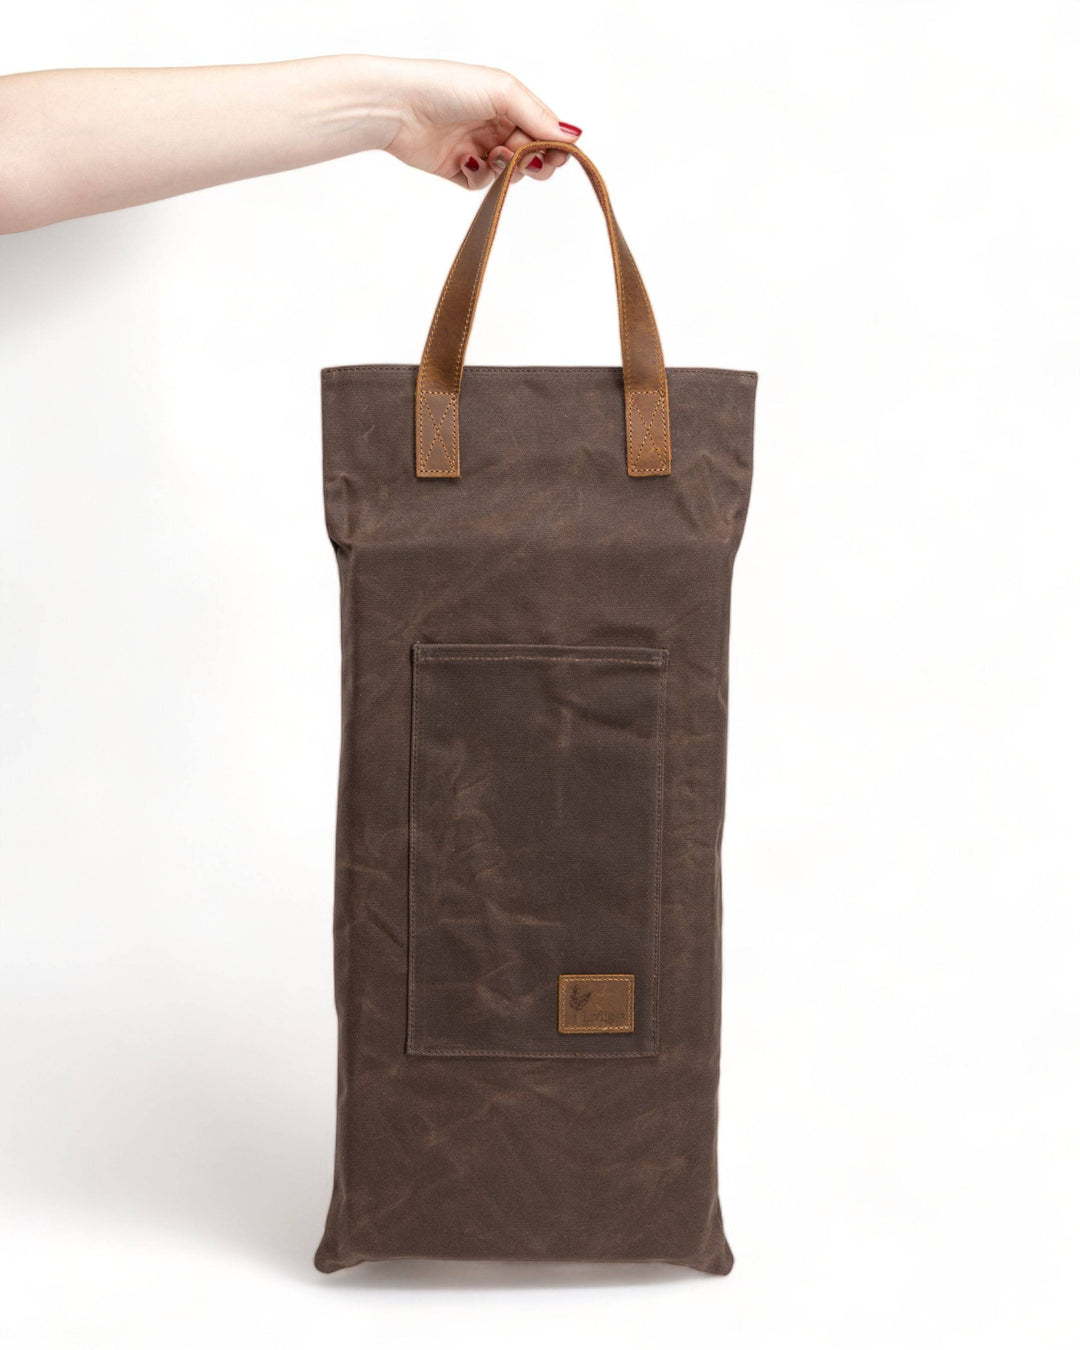 a person holding a brown bag with a brown handle